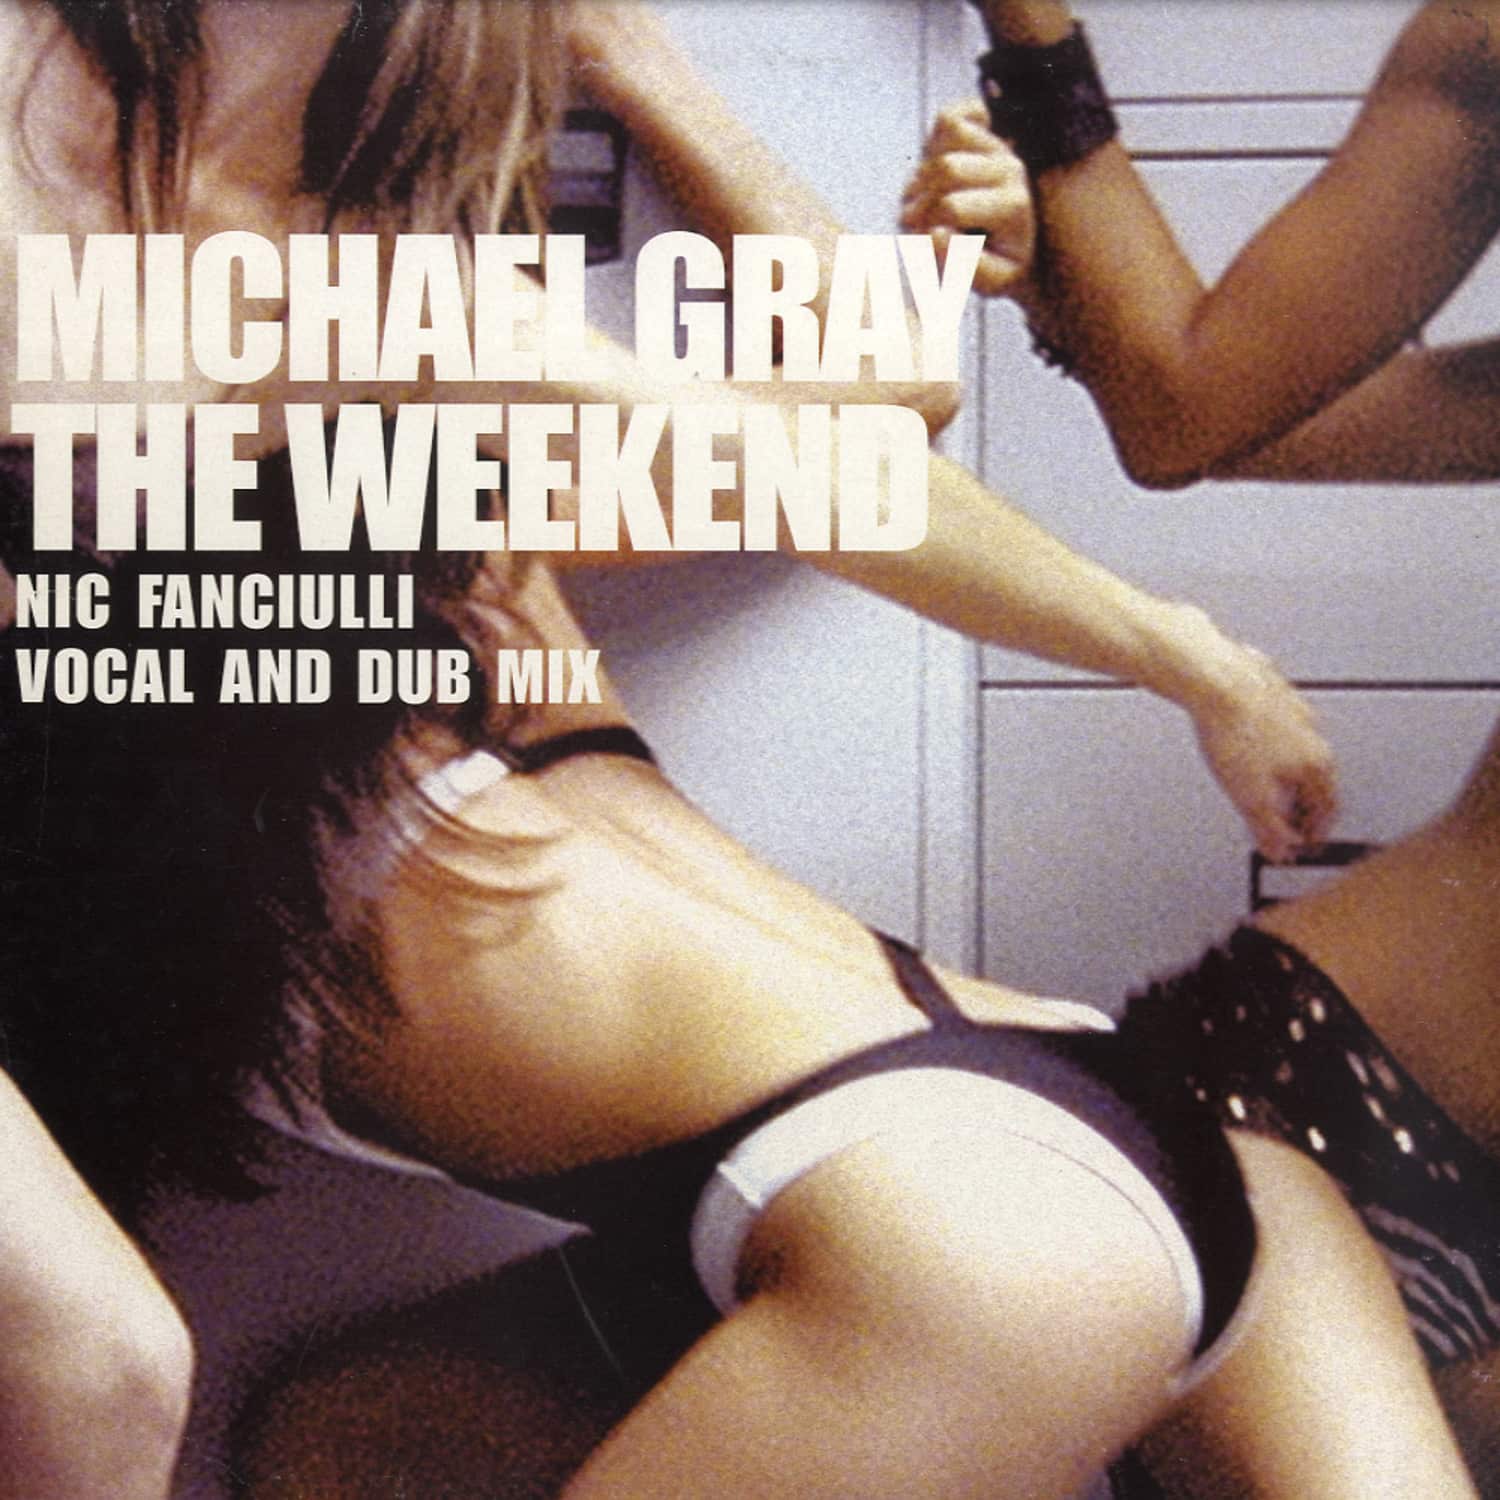 Michael Gray - THE WEEKEND 